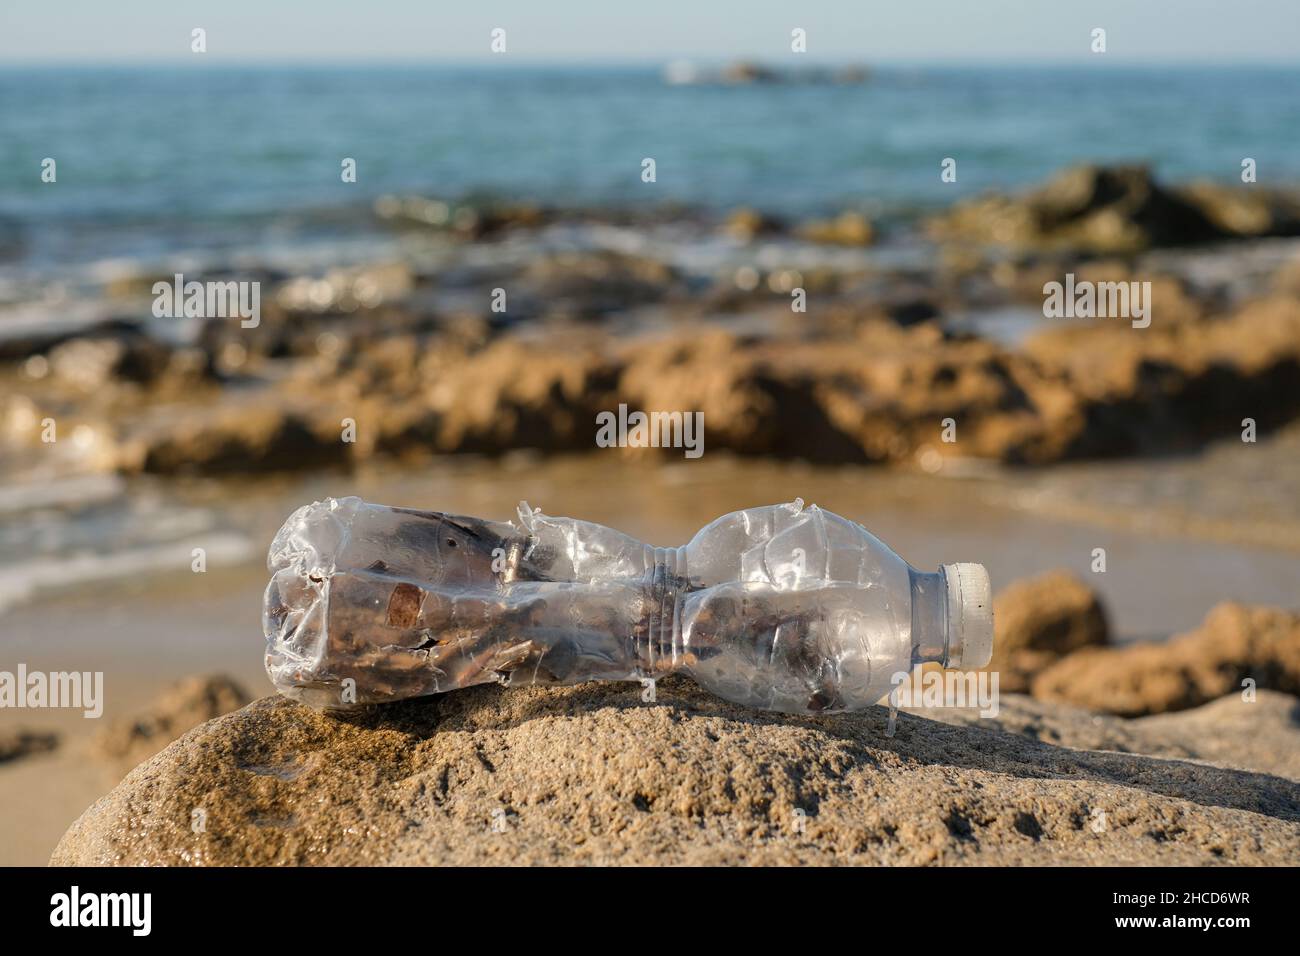 Plastic bottle discarded on pollution contaminated sea ecosystem, environment waste Stock Photo